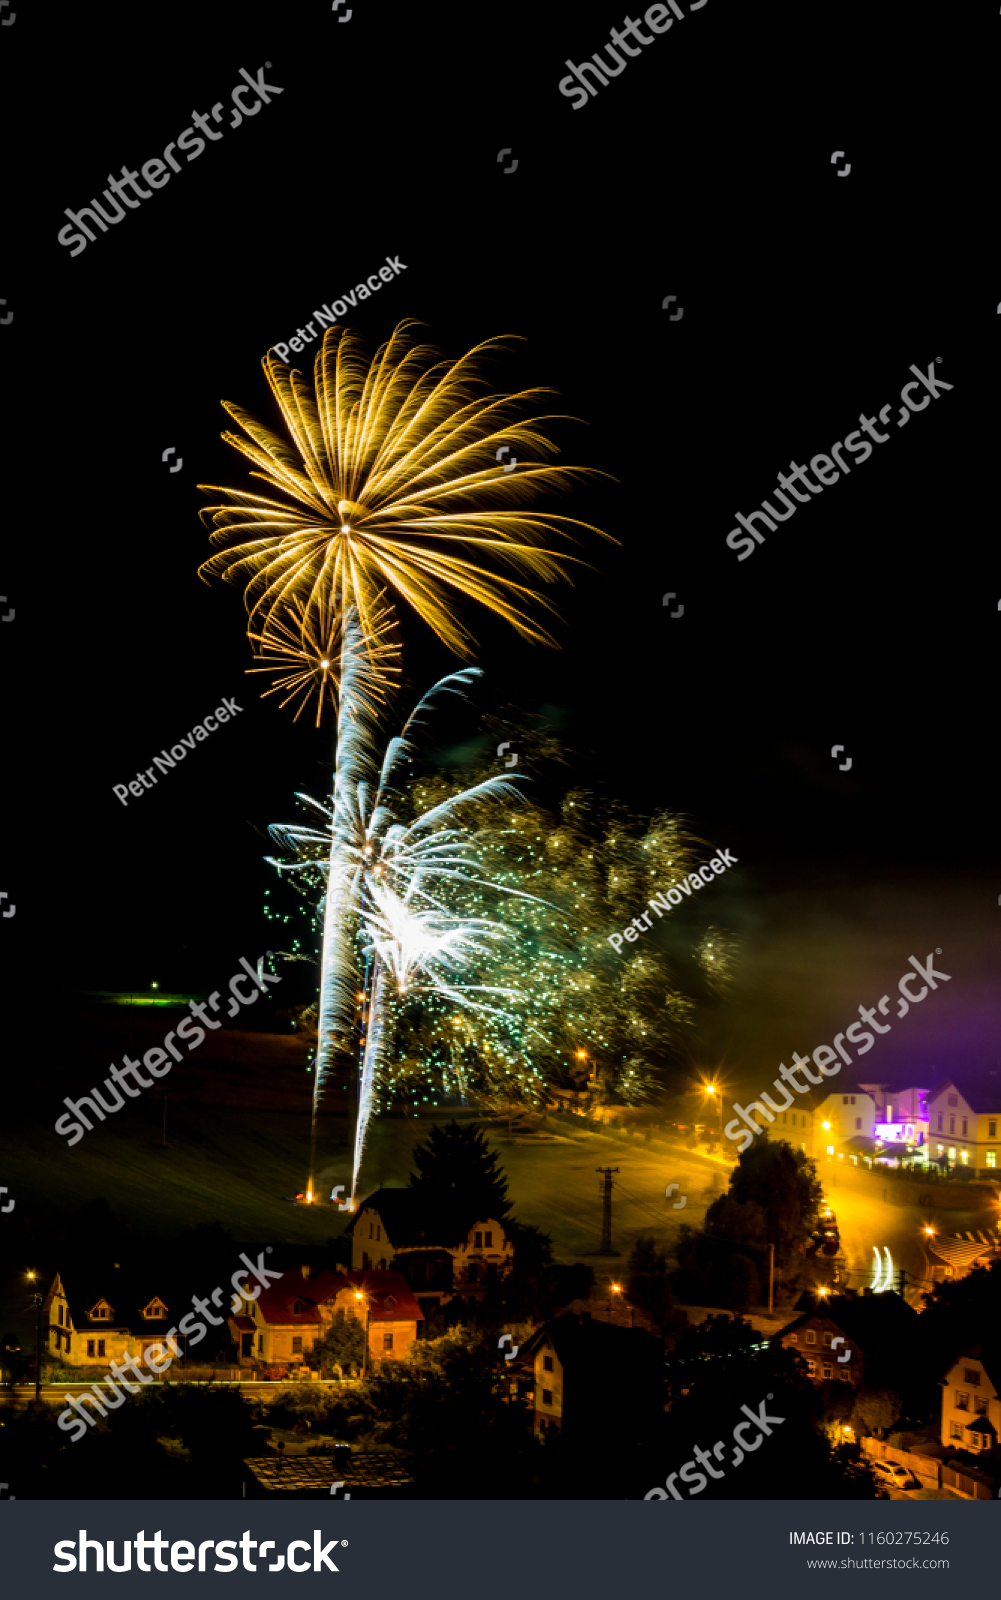 Yellow firework. Amazing fireworks, fireworks 2019, fireworks background, fireworks event, Celebration in the town. #1160275246